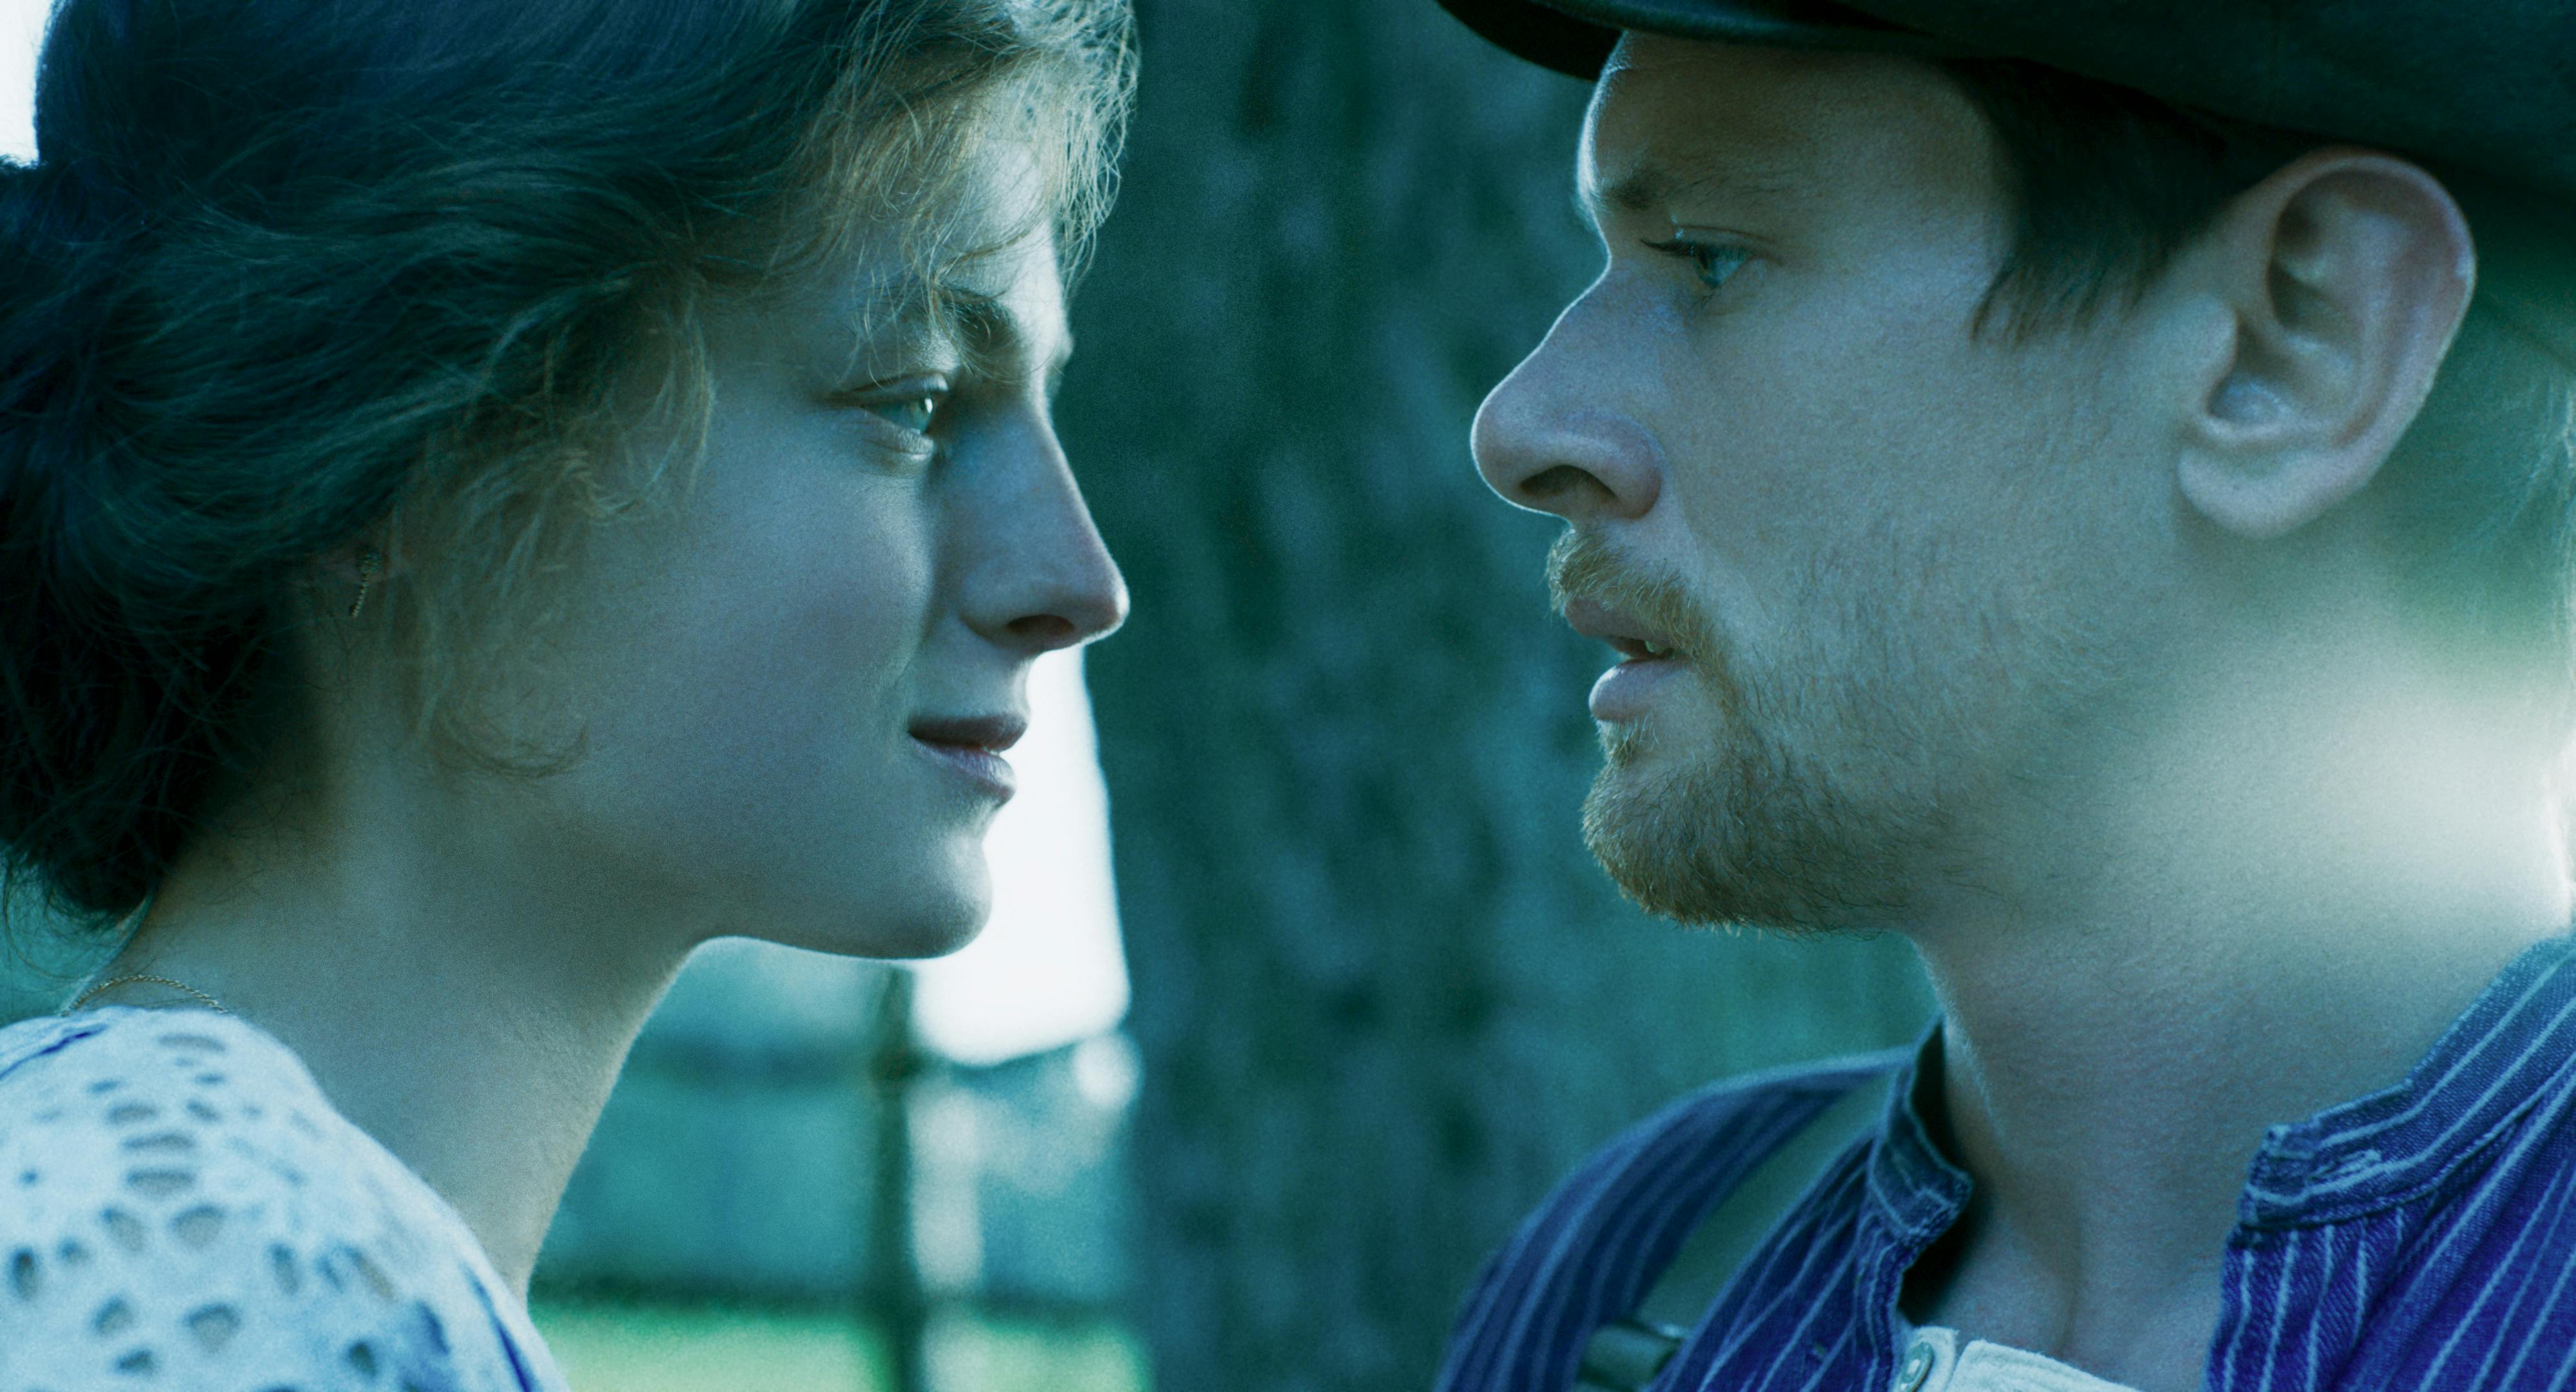 Lady Chatterley (Emma Corrin) and Oliver Mellors (Jack O'Connell) face off in a green hued light.